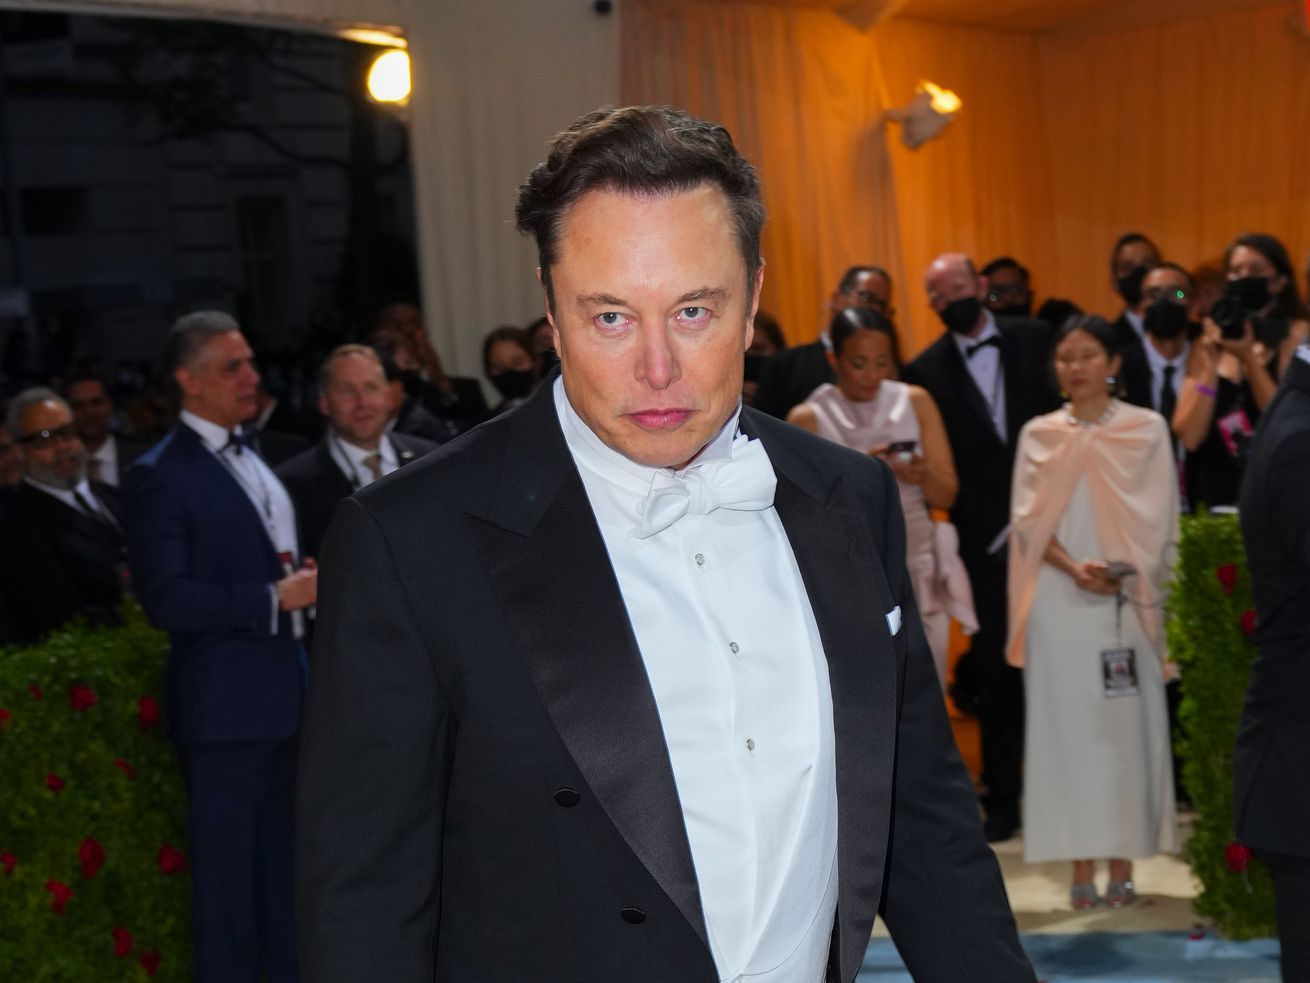 A photo of Elon Musk in a tuxedo from the waist up with a serious expression.